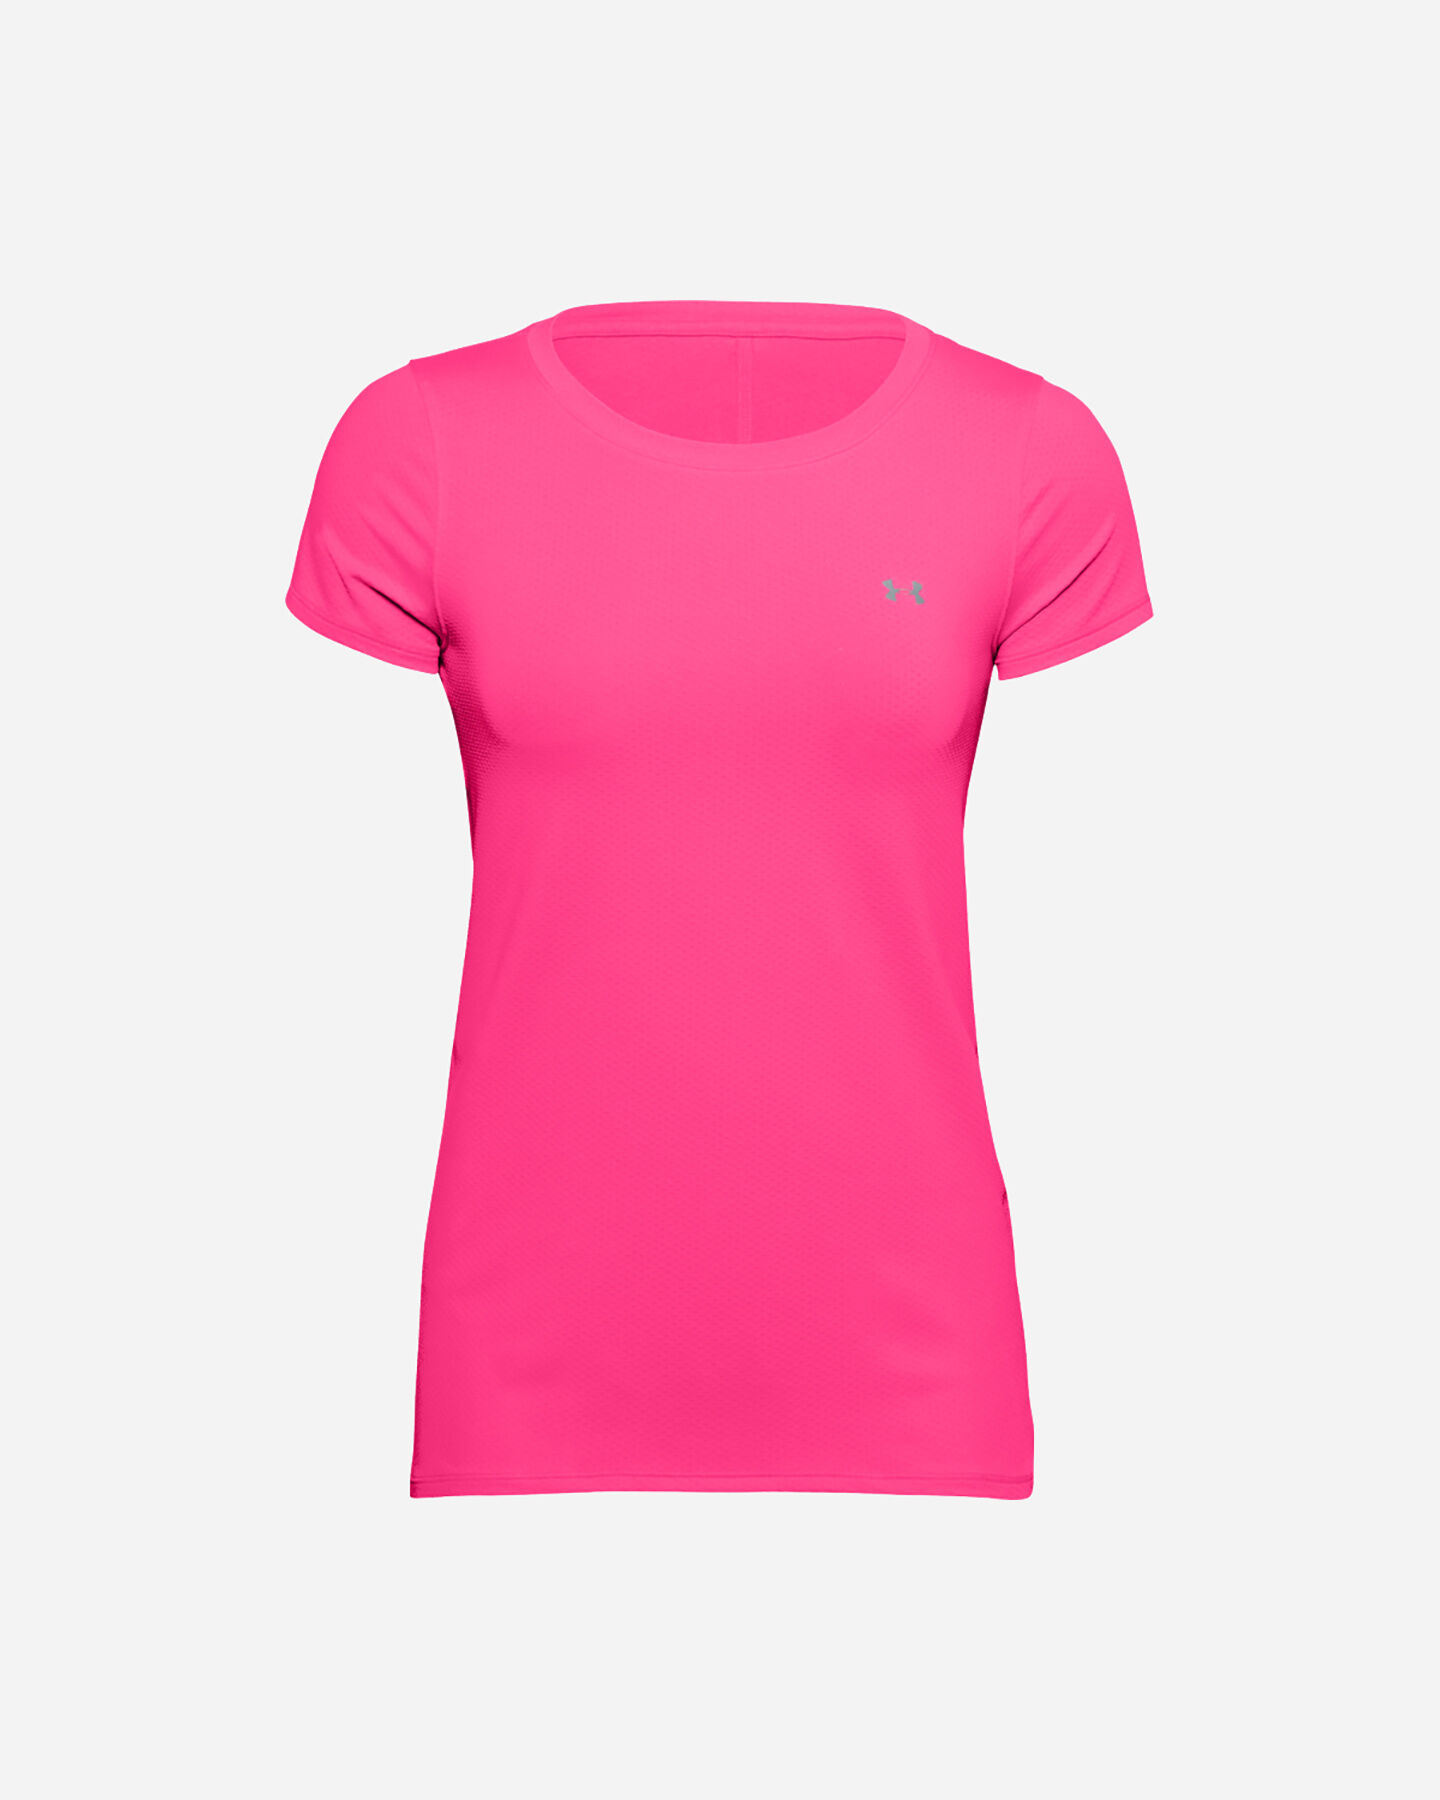  T-Shirt training UNDER ARMOUR MESH W S5228486 scatto 0